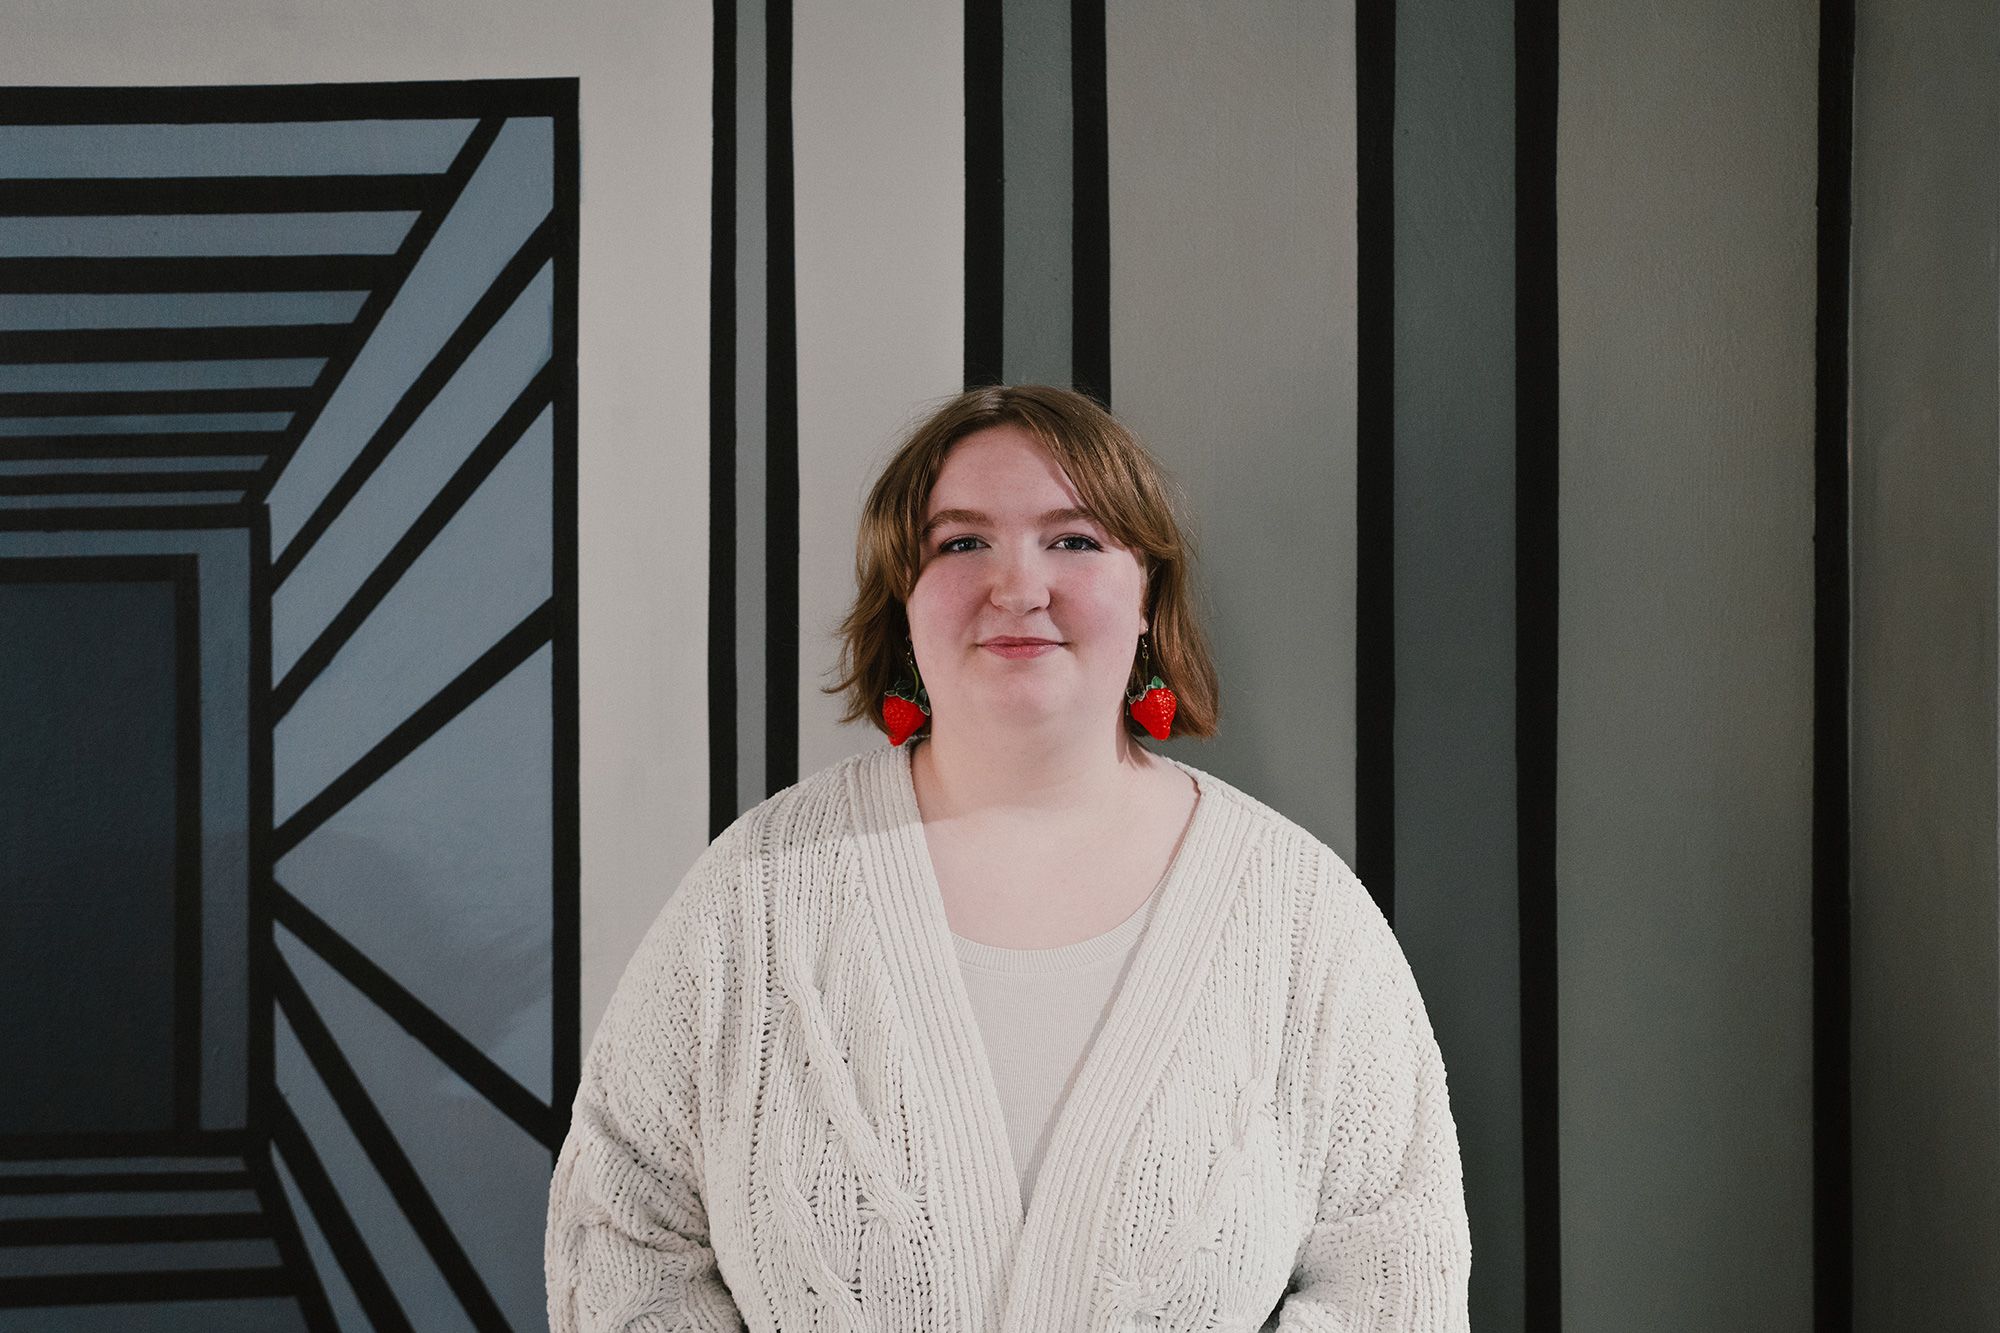 Image shows a person wearing a white cardigan and small red earrings with short brown hair smiling while looking at the camera. In the background there is a painting that uses different shades of grey.